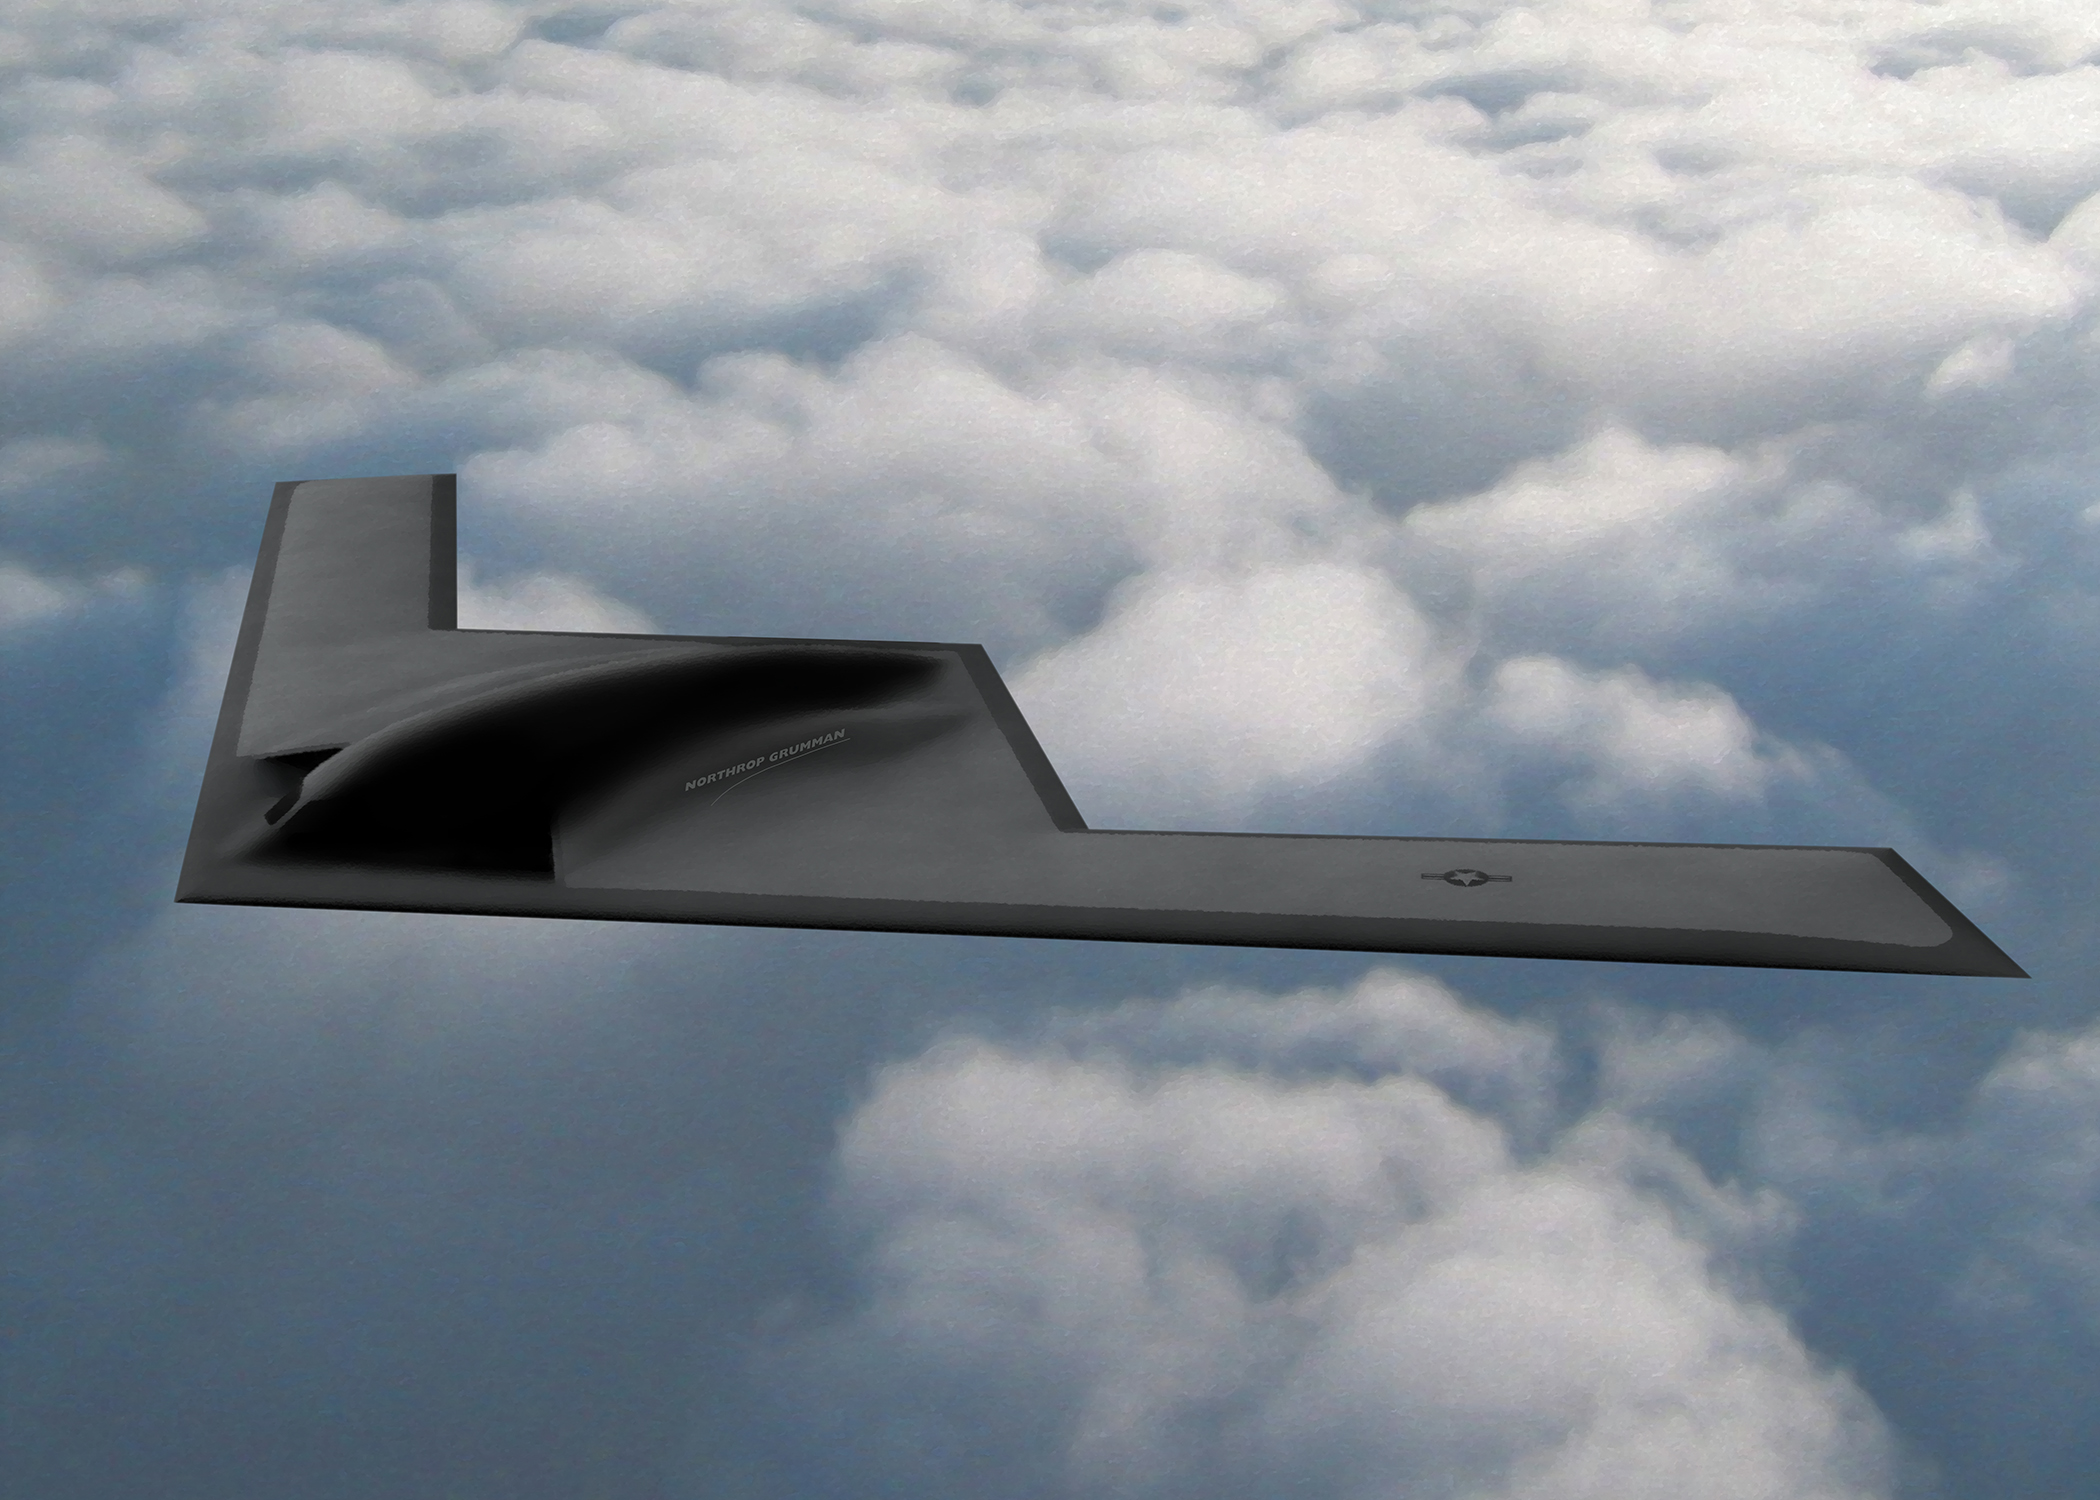 Artist impression of the B-21 Raider, an American heavy bomber under development for the United States Air Force by Northrop Grumman